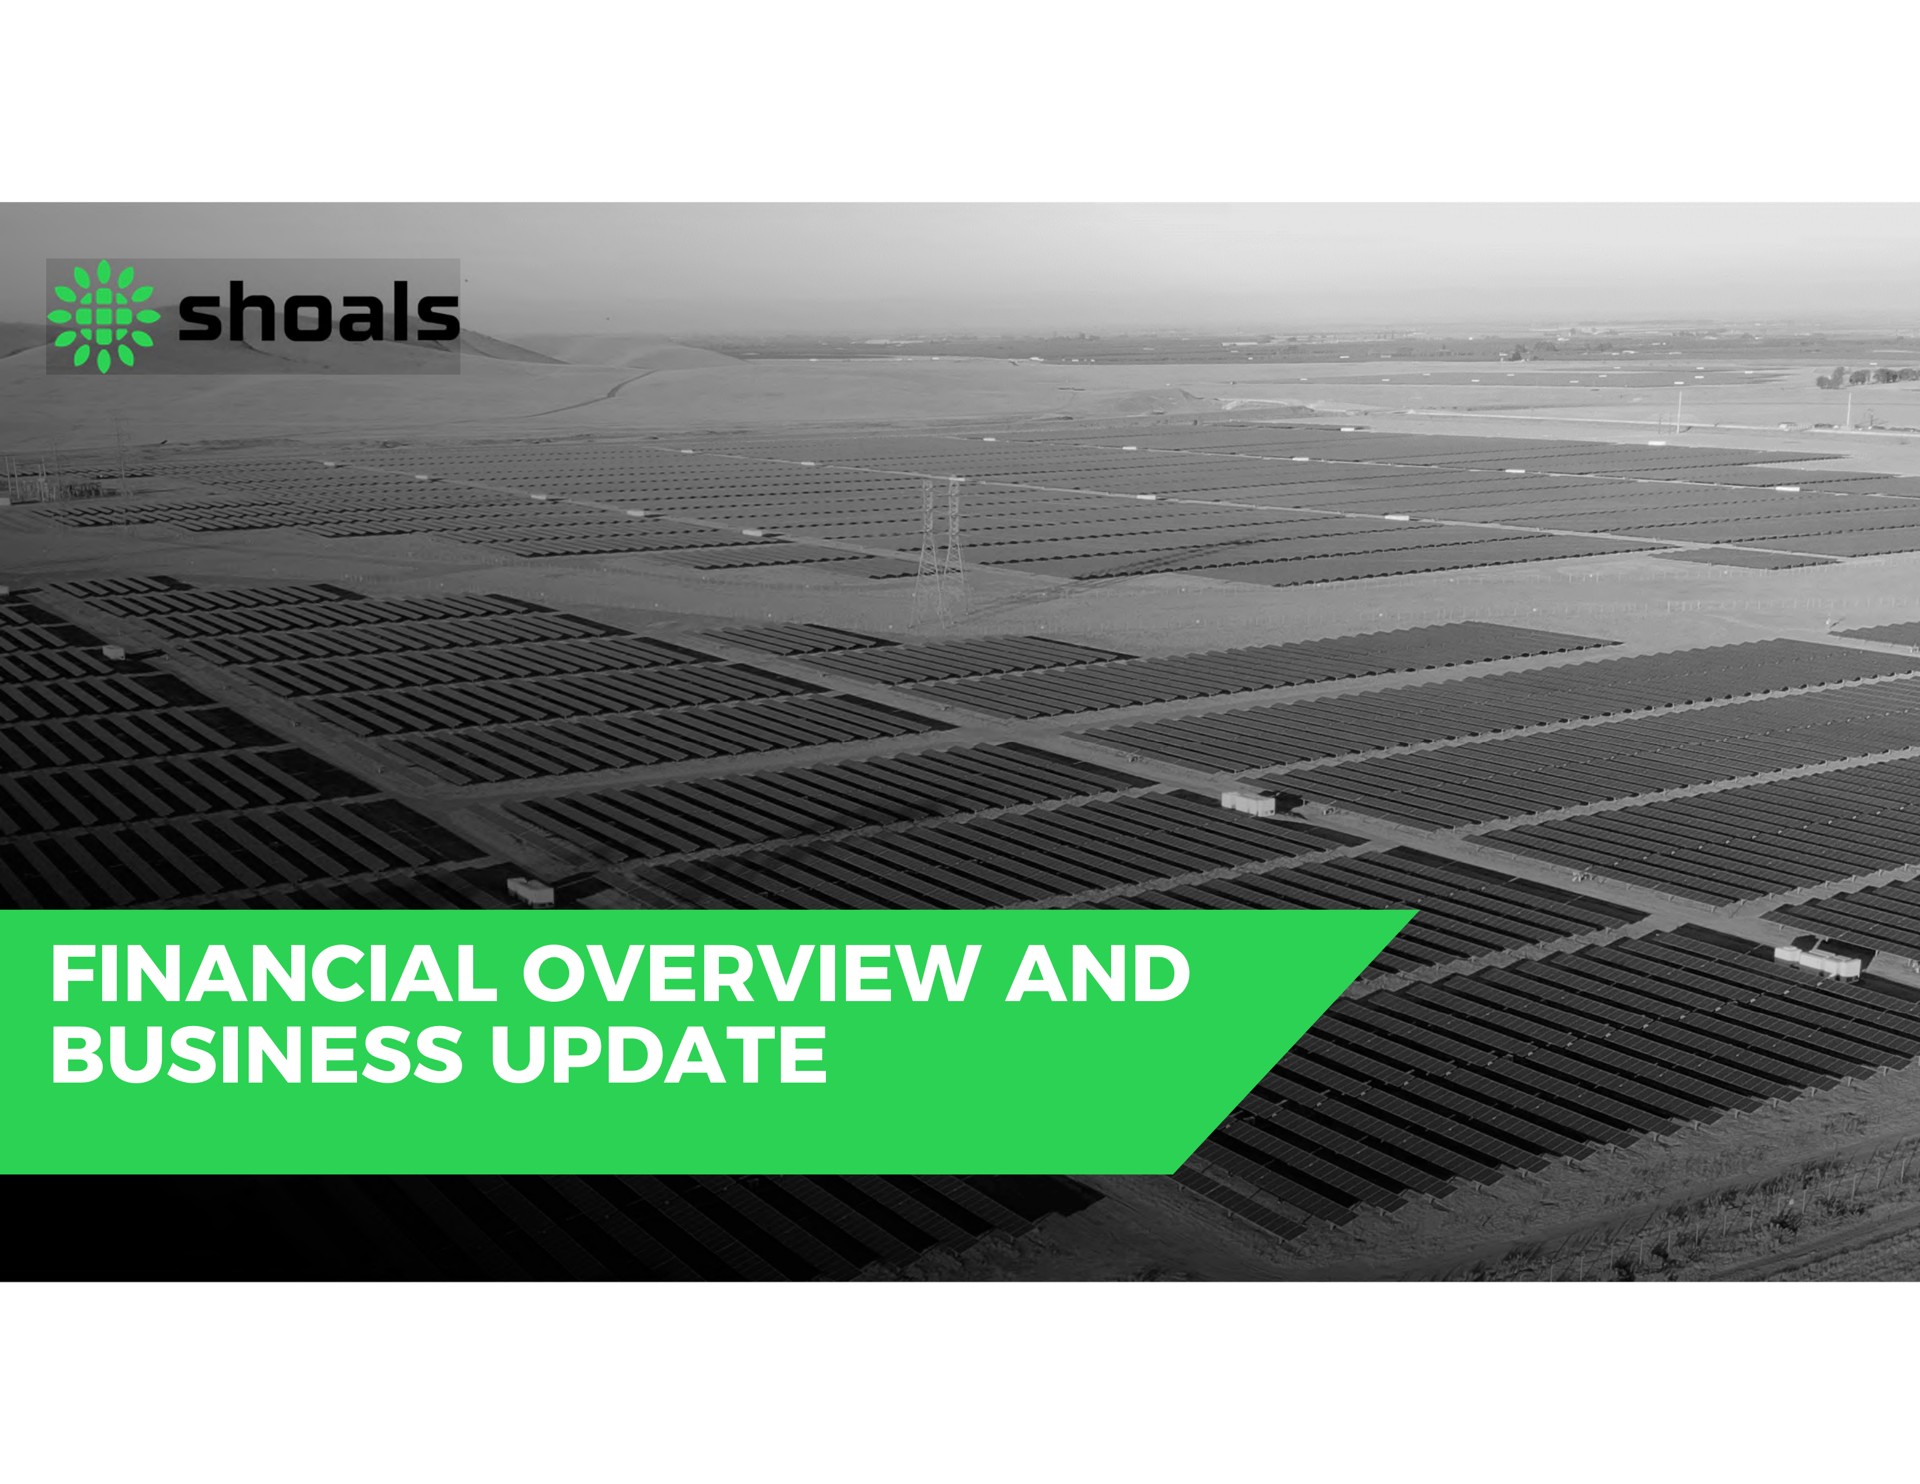 financial overview and business update | Shoals